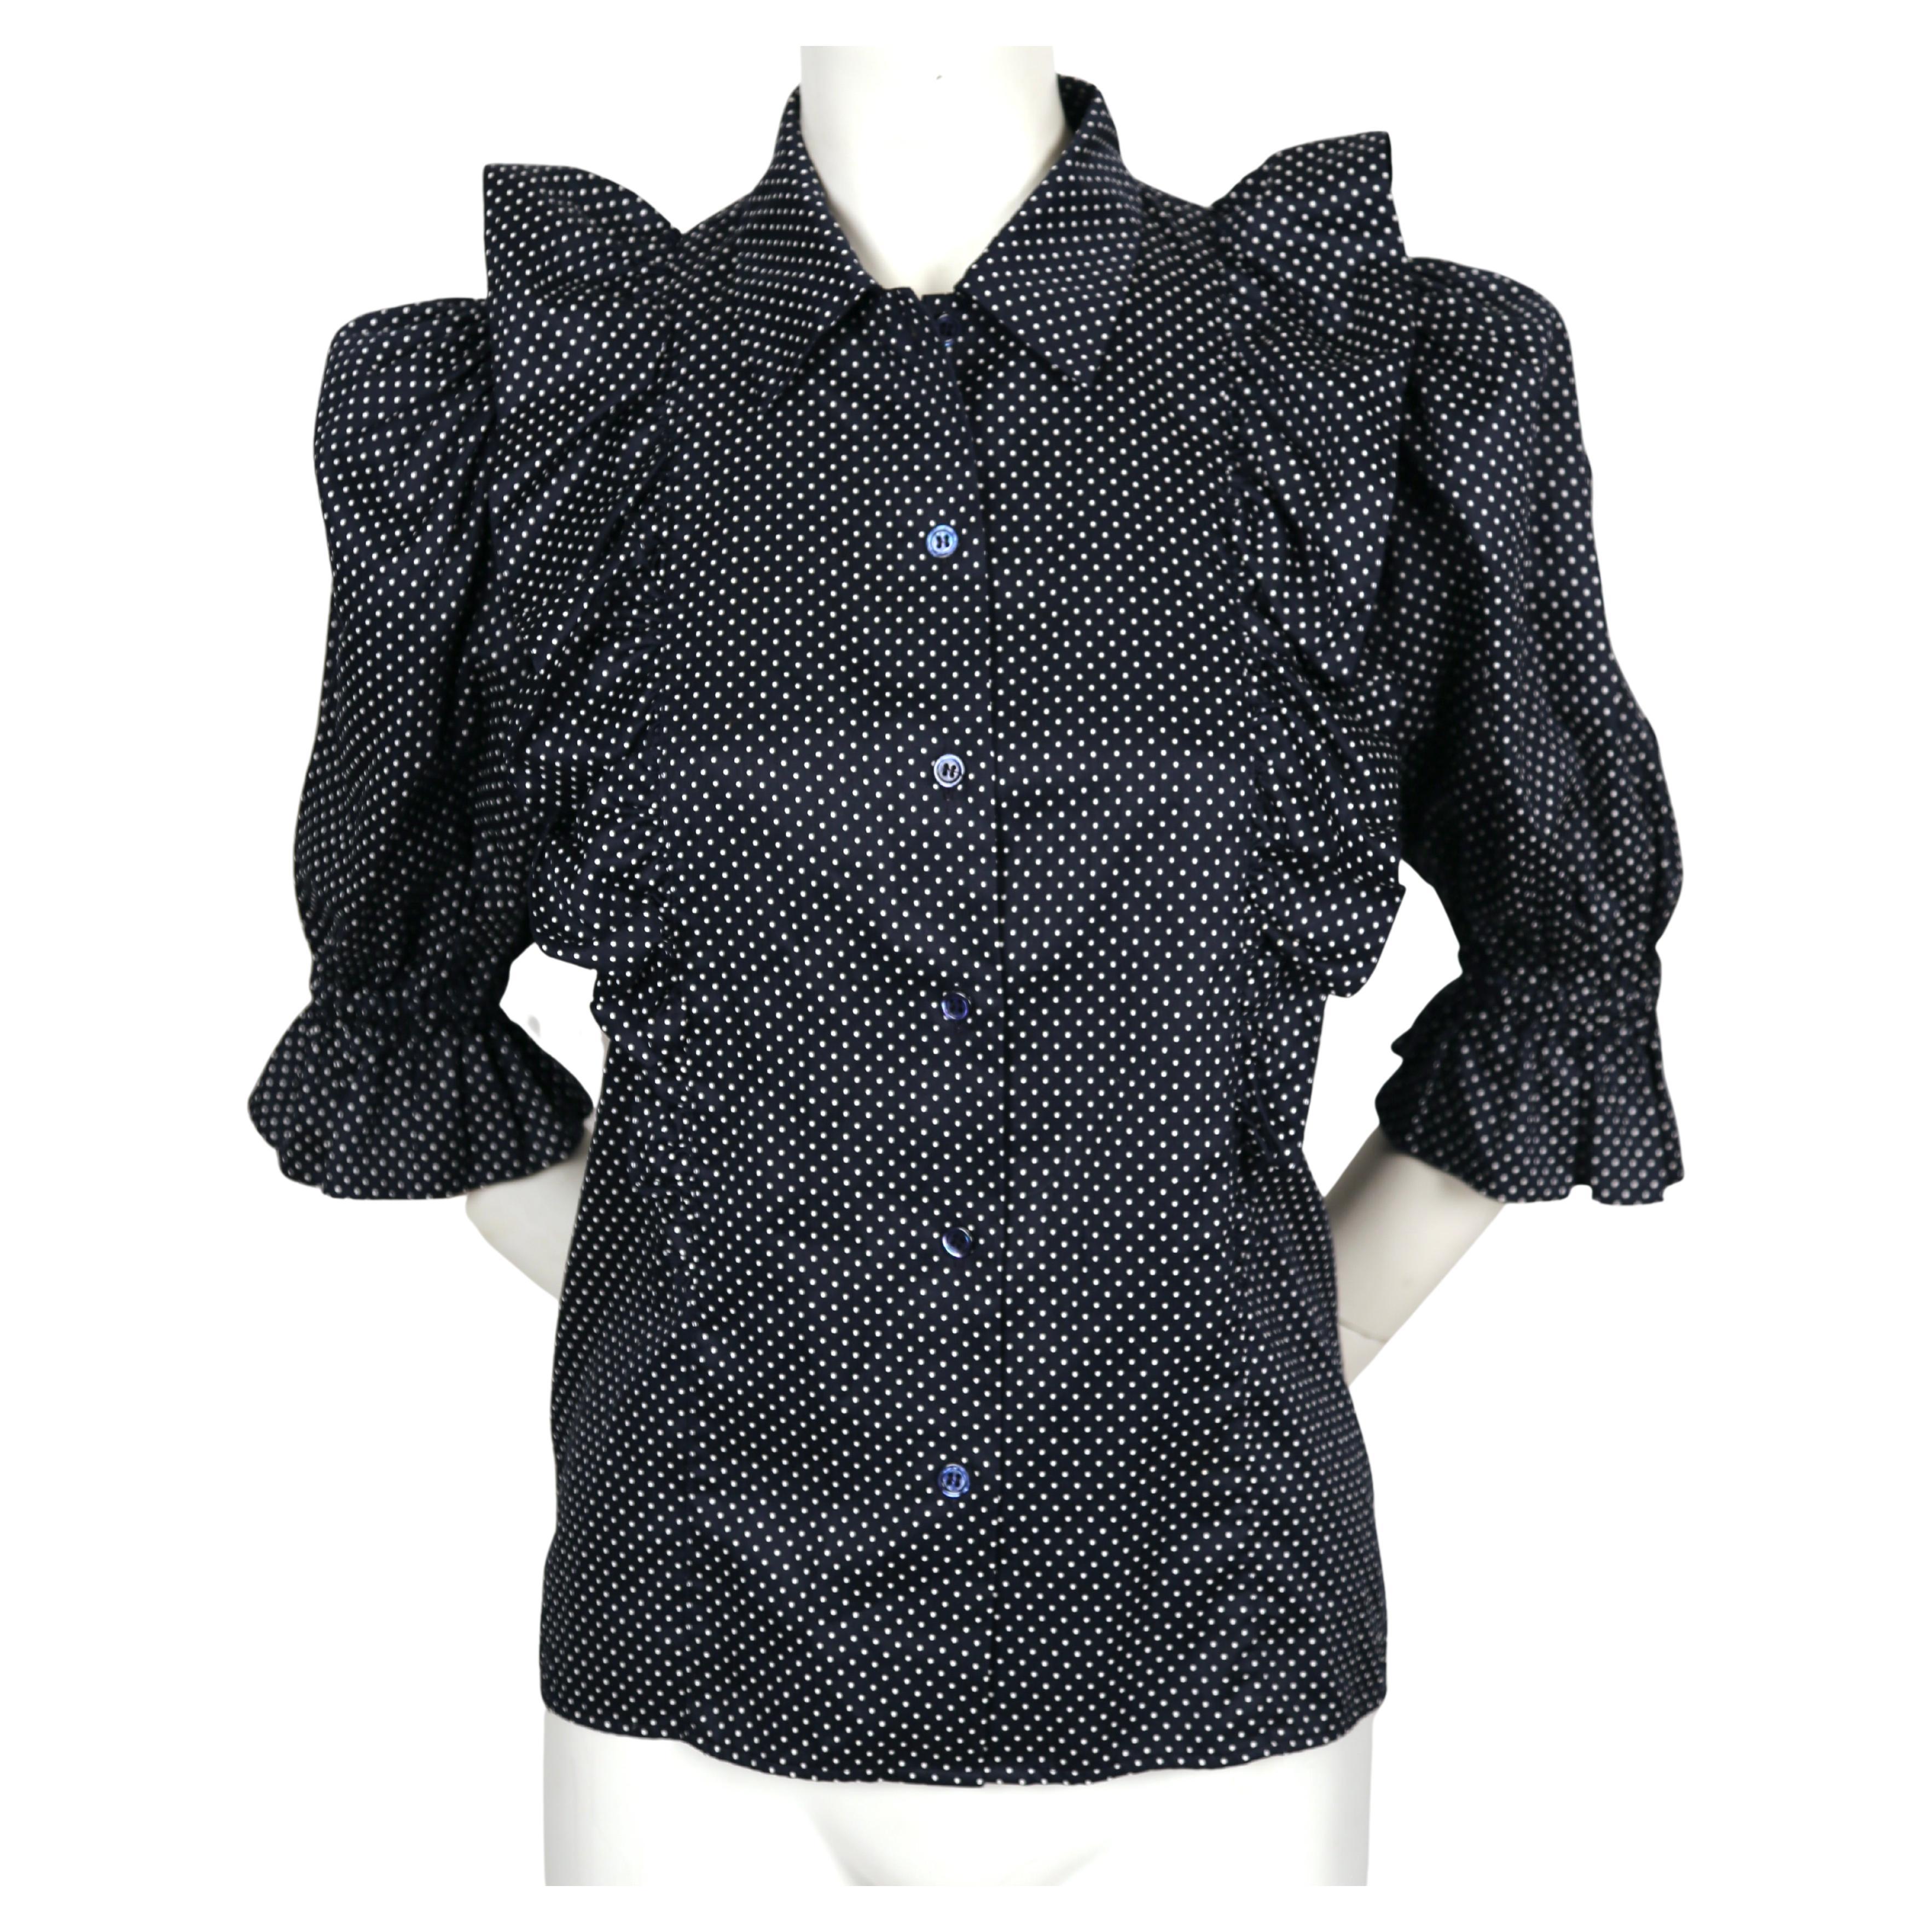 Deepest navy-blue, silk blouse with flounced trim and puff sleeves designed by Yves Saint Laurent dating to the late 1970's, early 1980's. No size is indicated but this best fits a 0 to slim 4. Approximate measurements: shoulder 13.5, bust 34-35